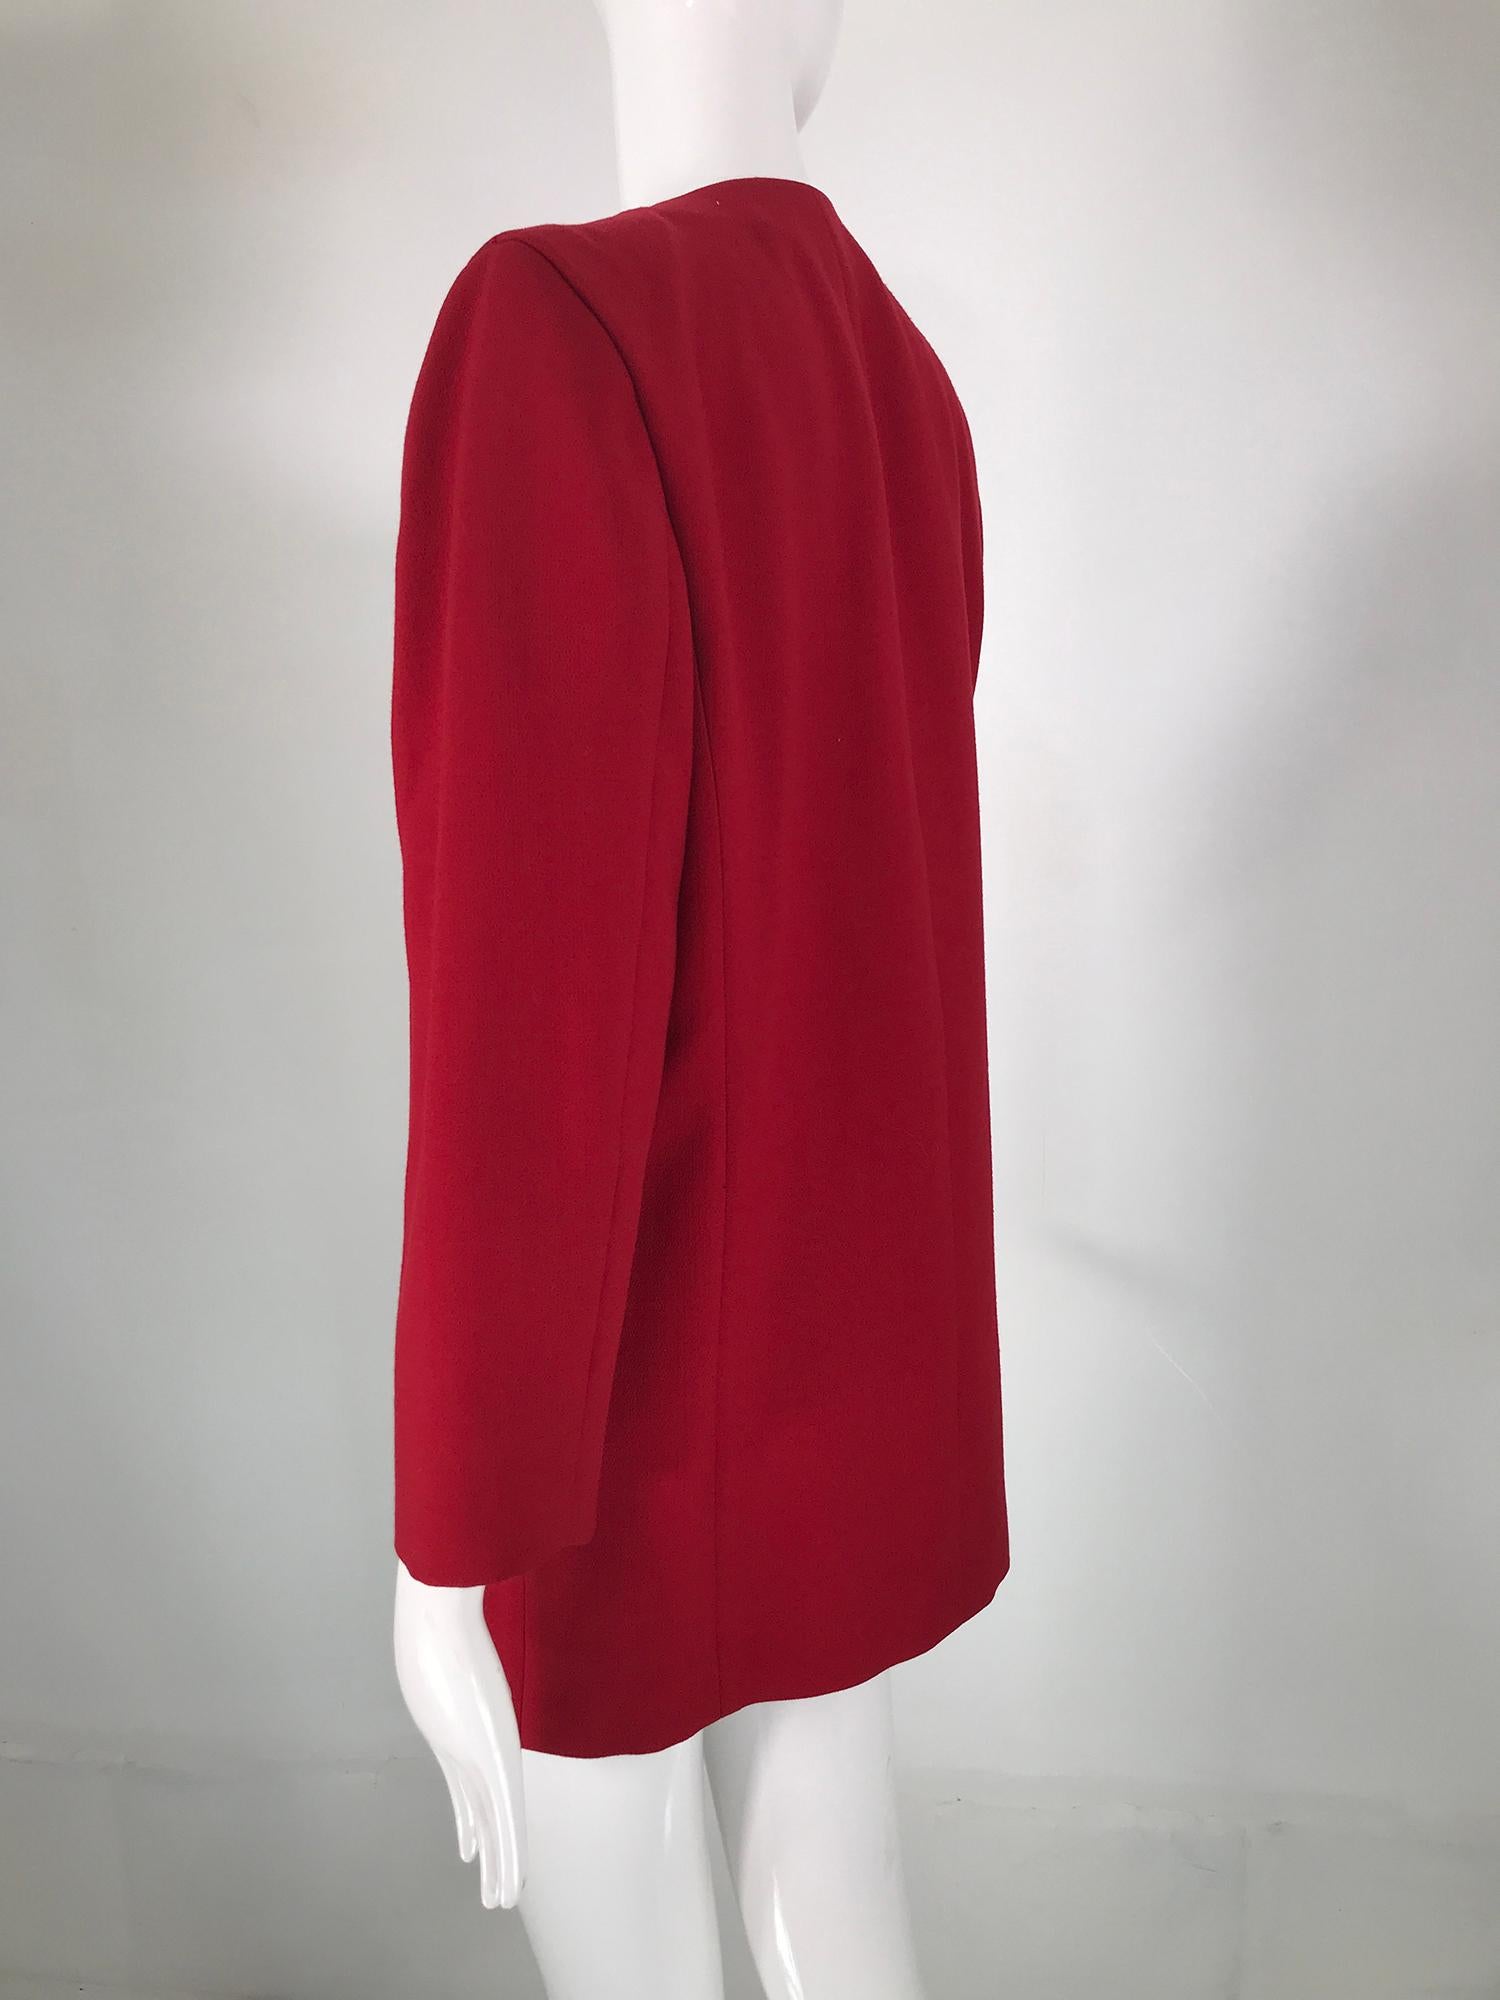 Boutique Pierre Cardin Paris Red Wool Space Age Jacket 1960s Rare Label In Good Condition In West Palm Beach, FL